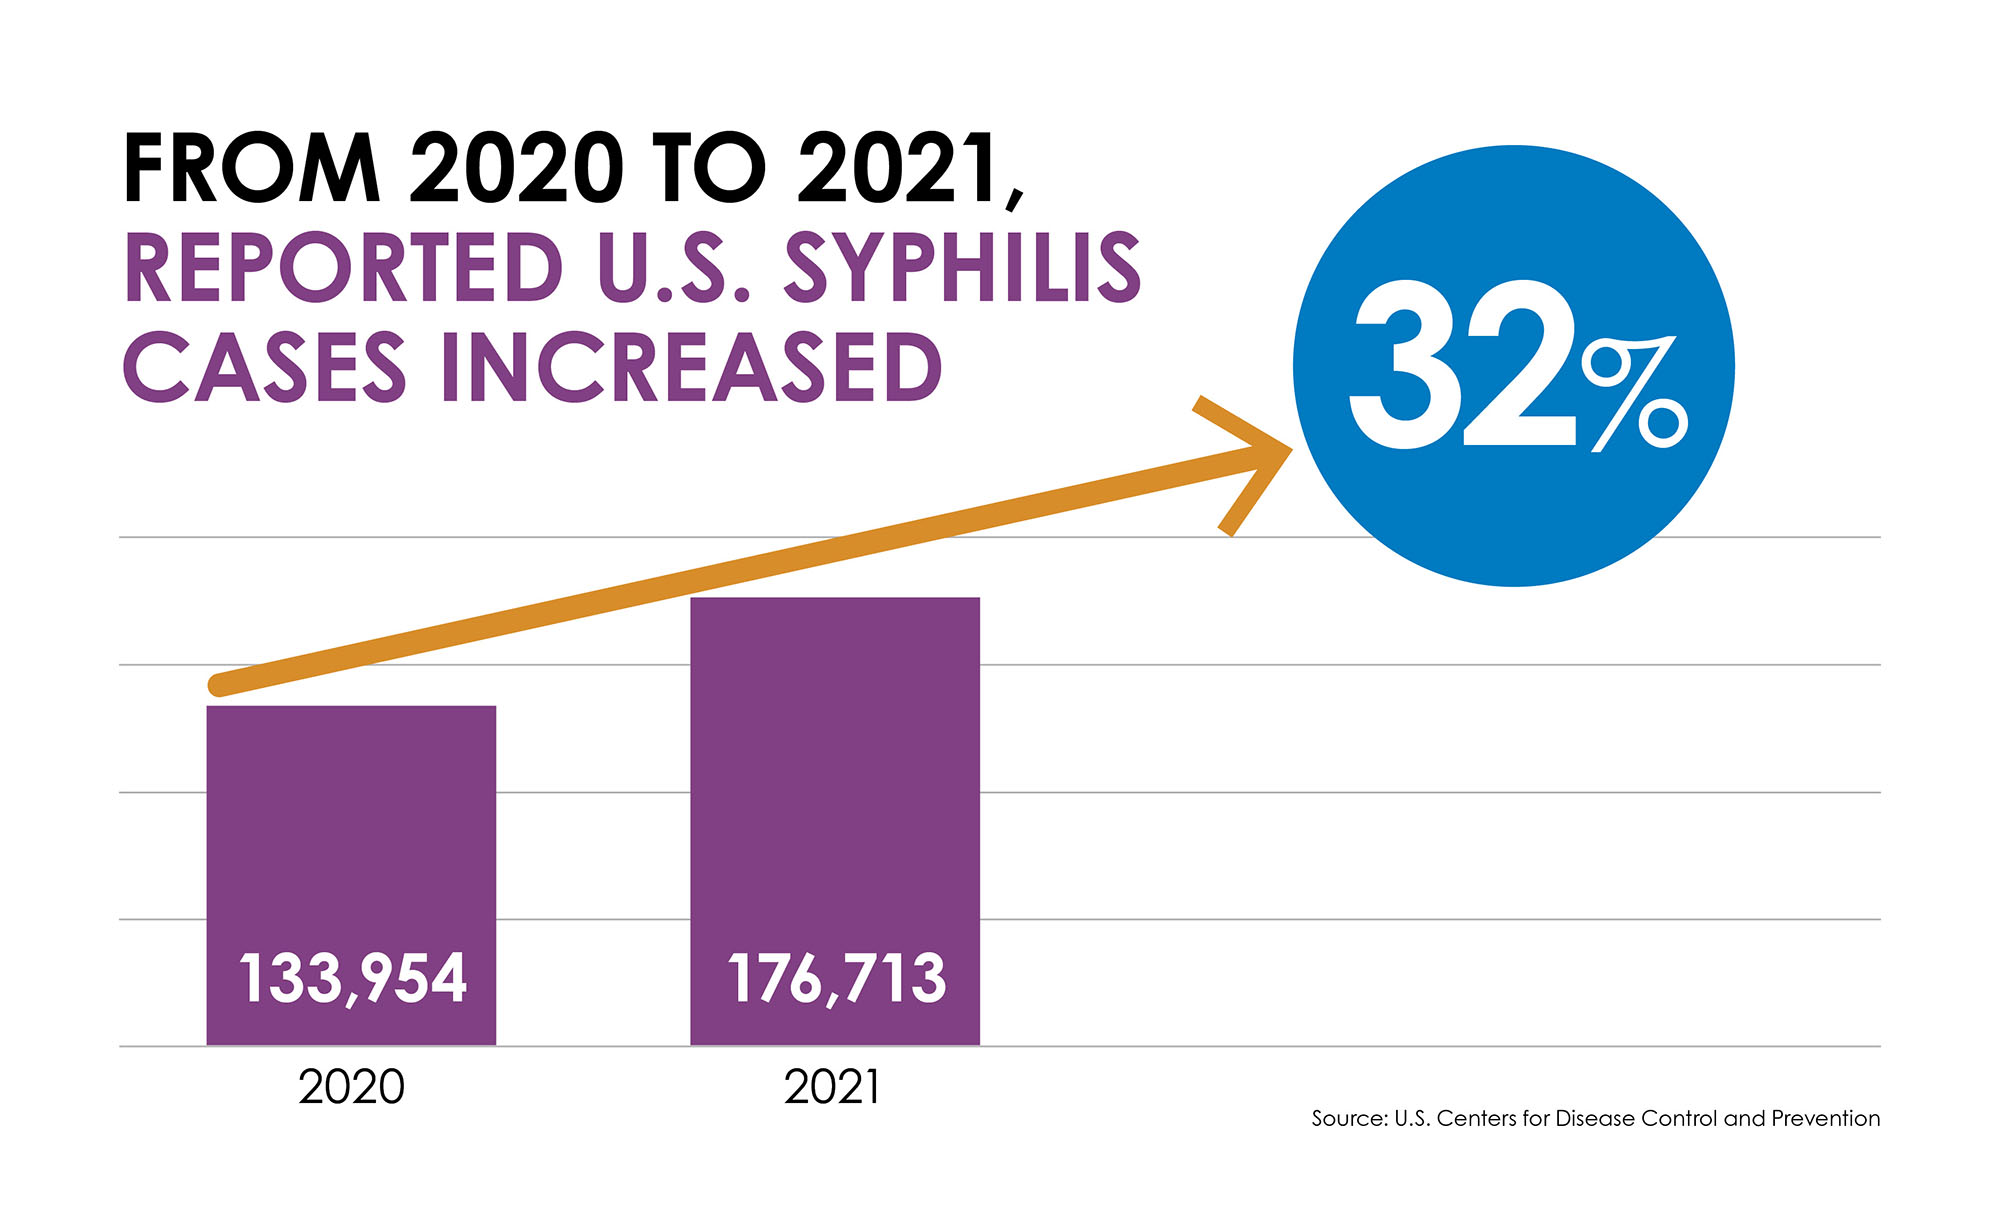 A bar chart showing a 32% increase in reported syphilis between 2020 and 2021, from 133,954 to 176,713